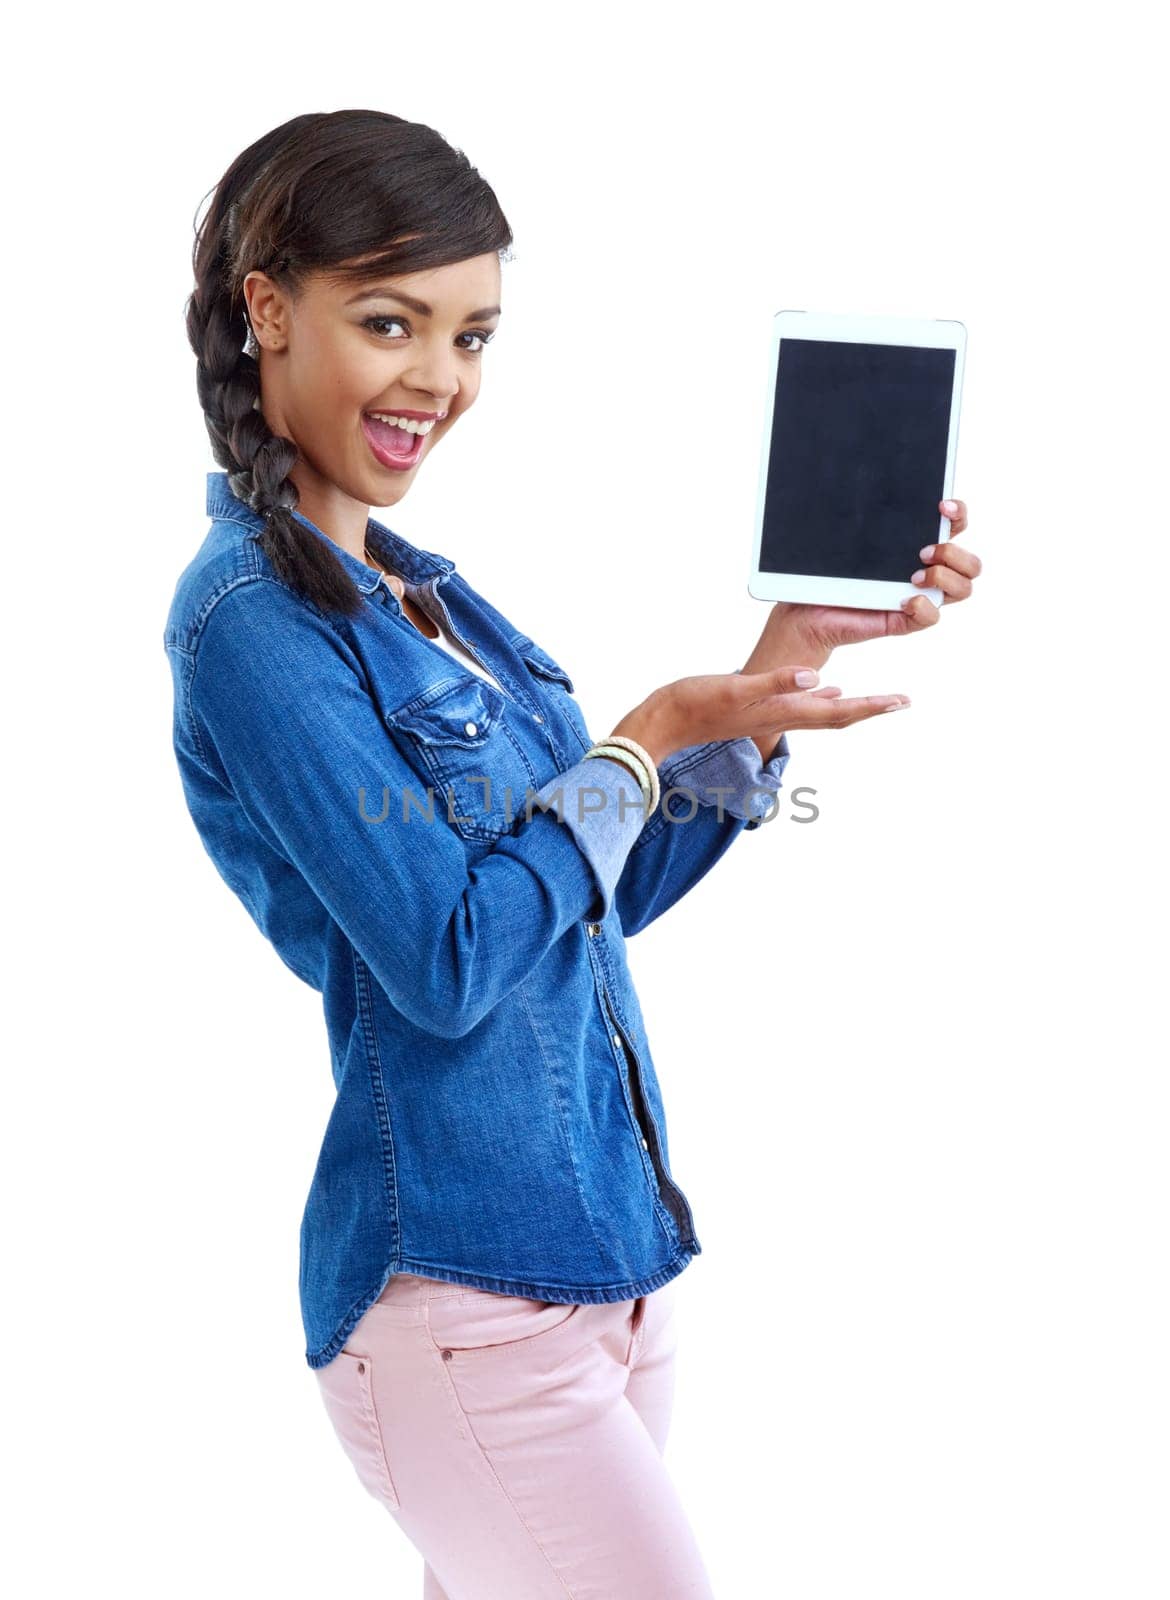 Girl, portrait and presentation of tablet screen in studio for ebook reader or learning app on white background. Excited student with digital marketing for online education or electronic resources.